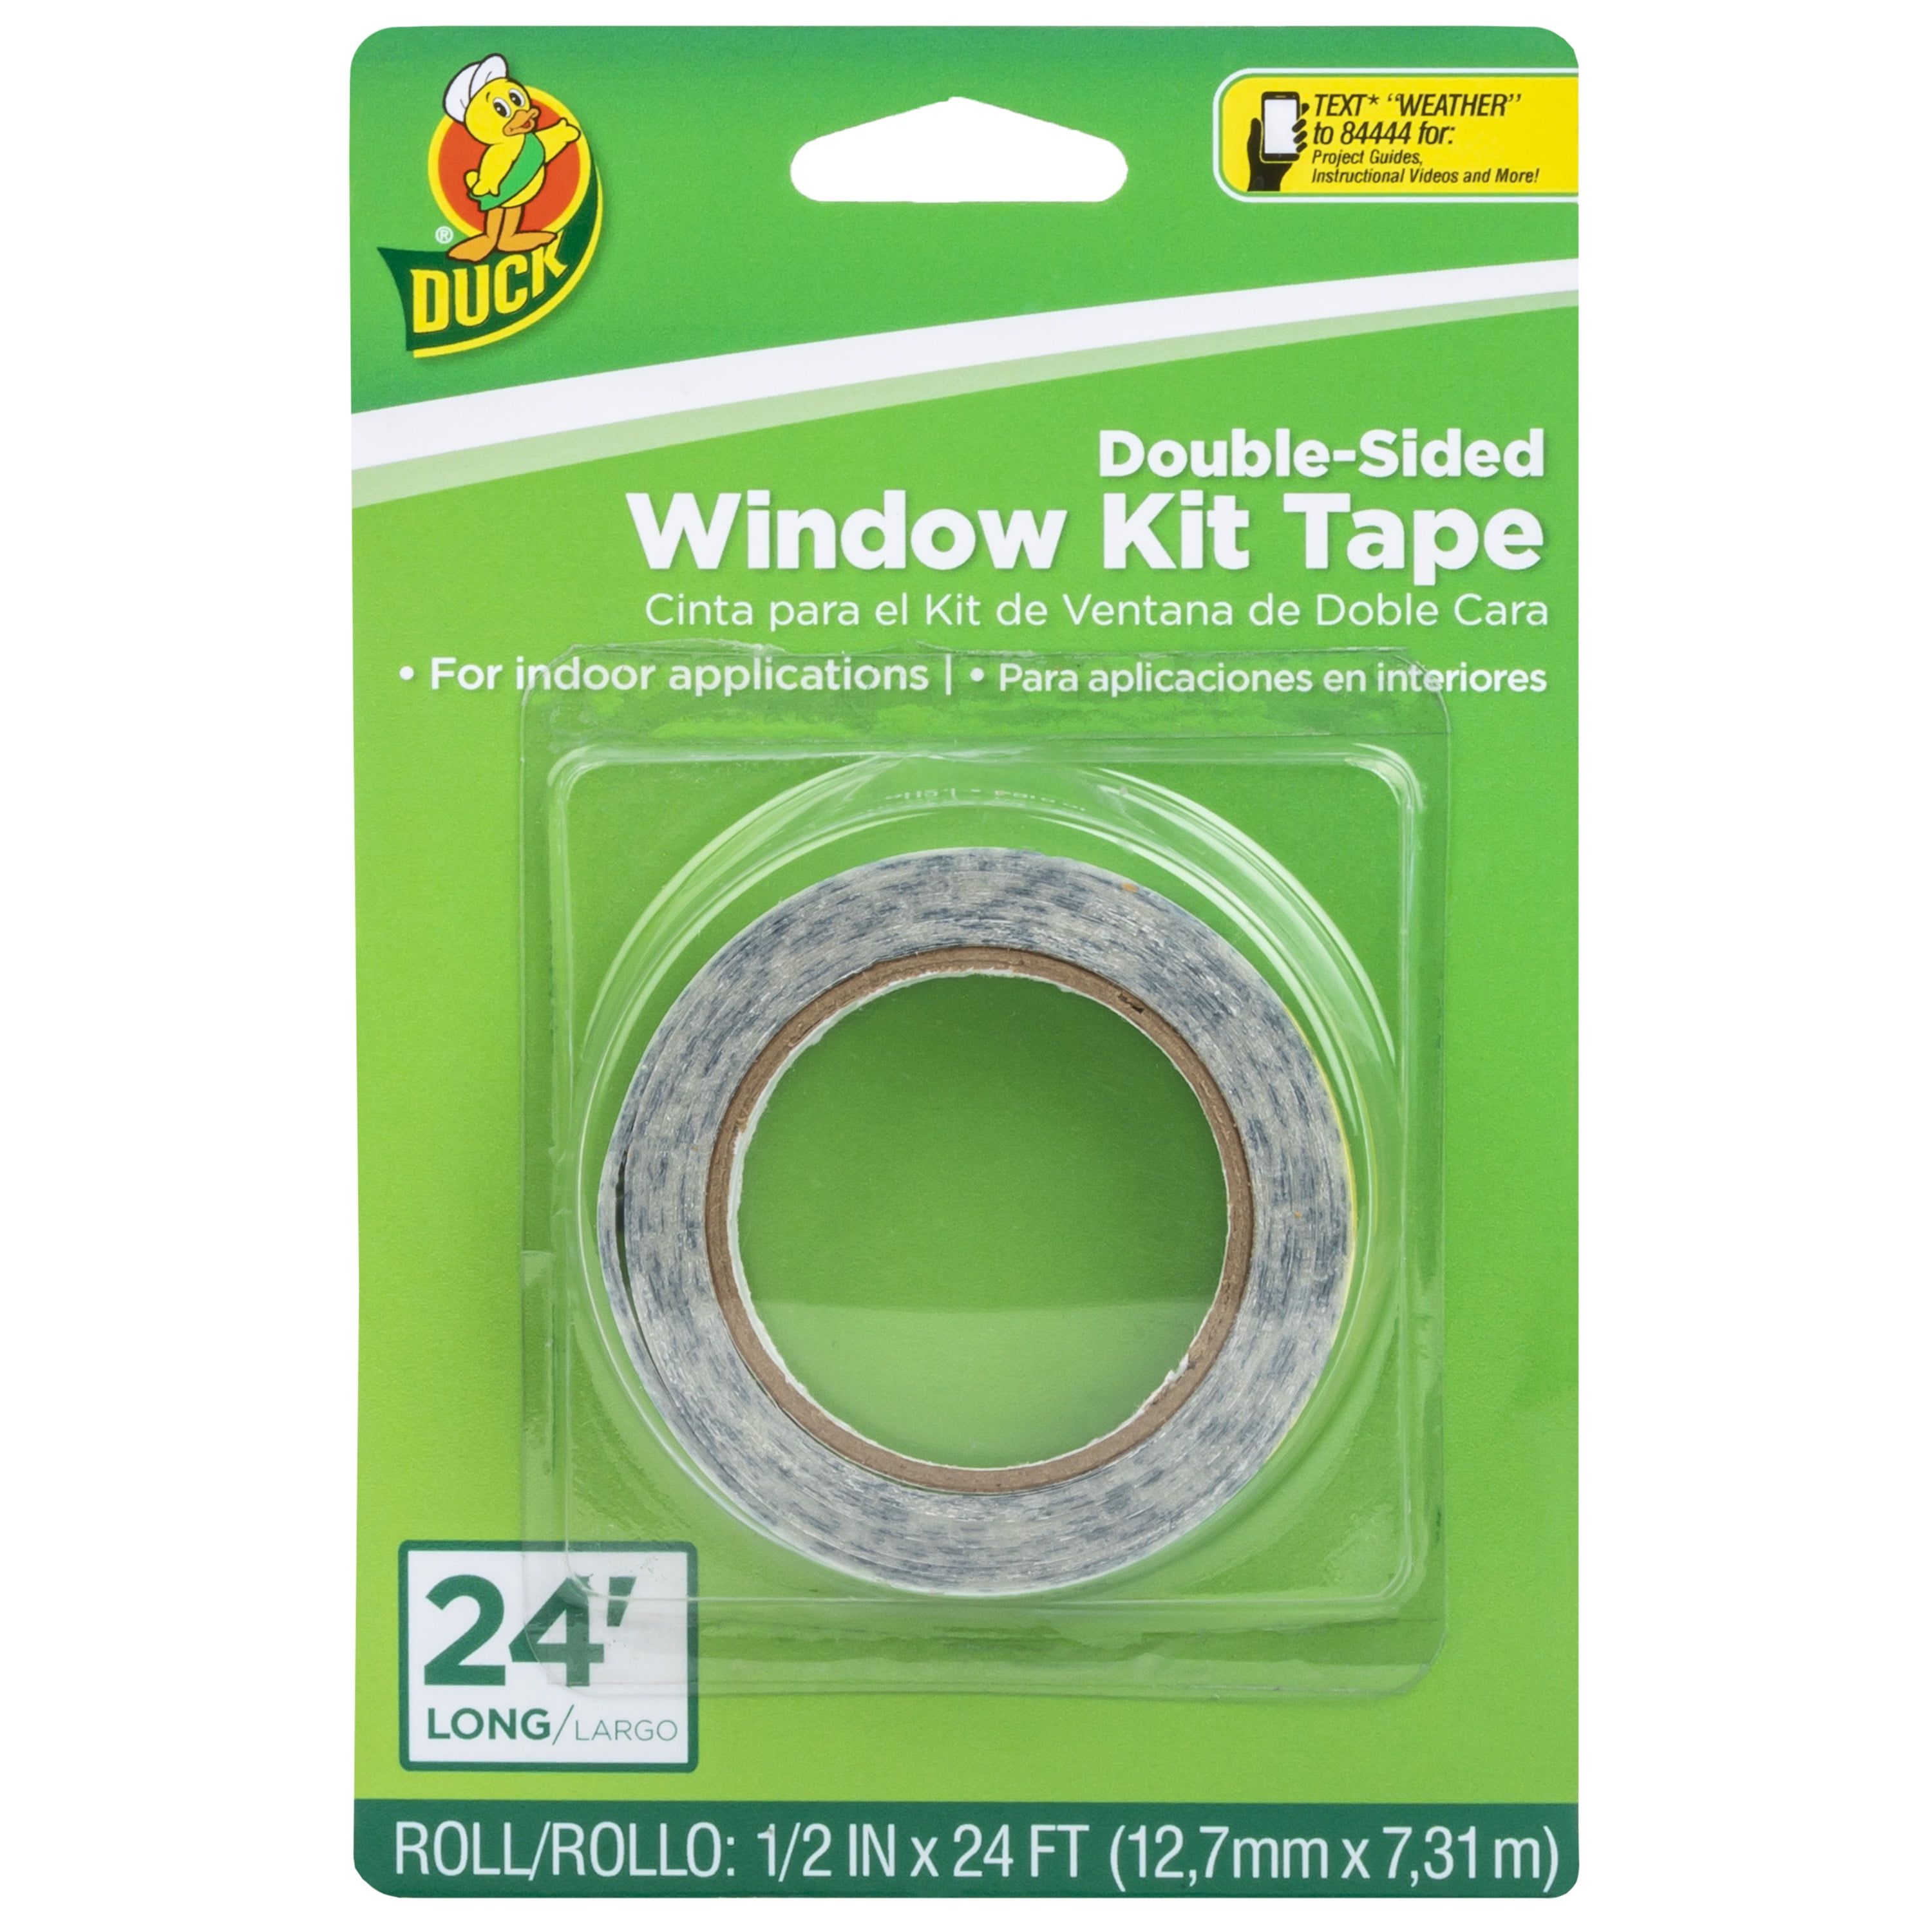 Lot of 4 Duck Double Sided Window Kit Tape 24’ Long For Indoor Applications NEW 